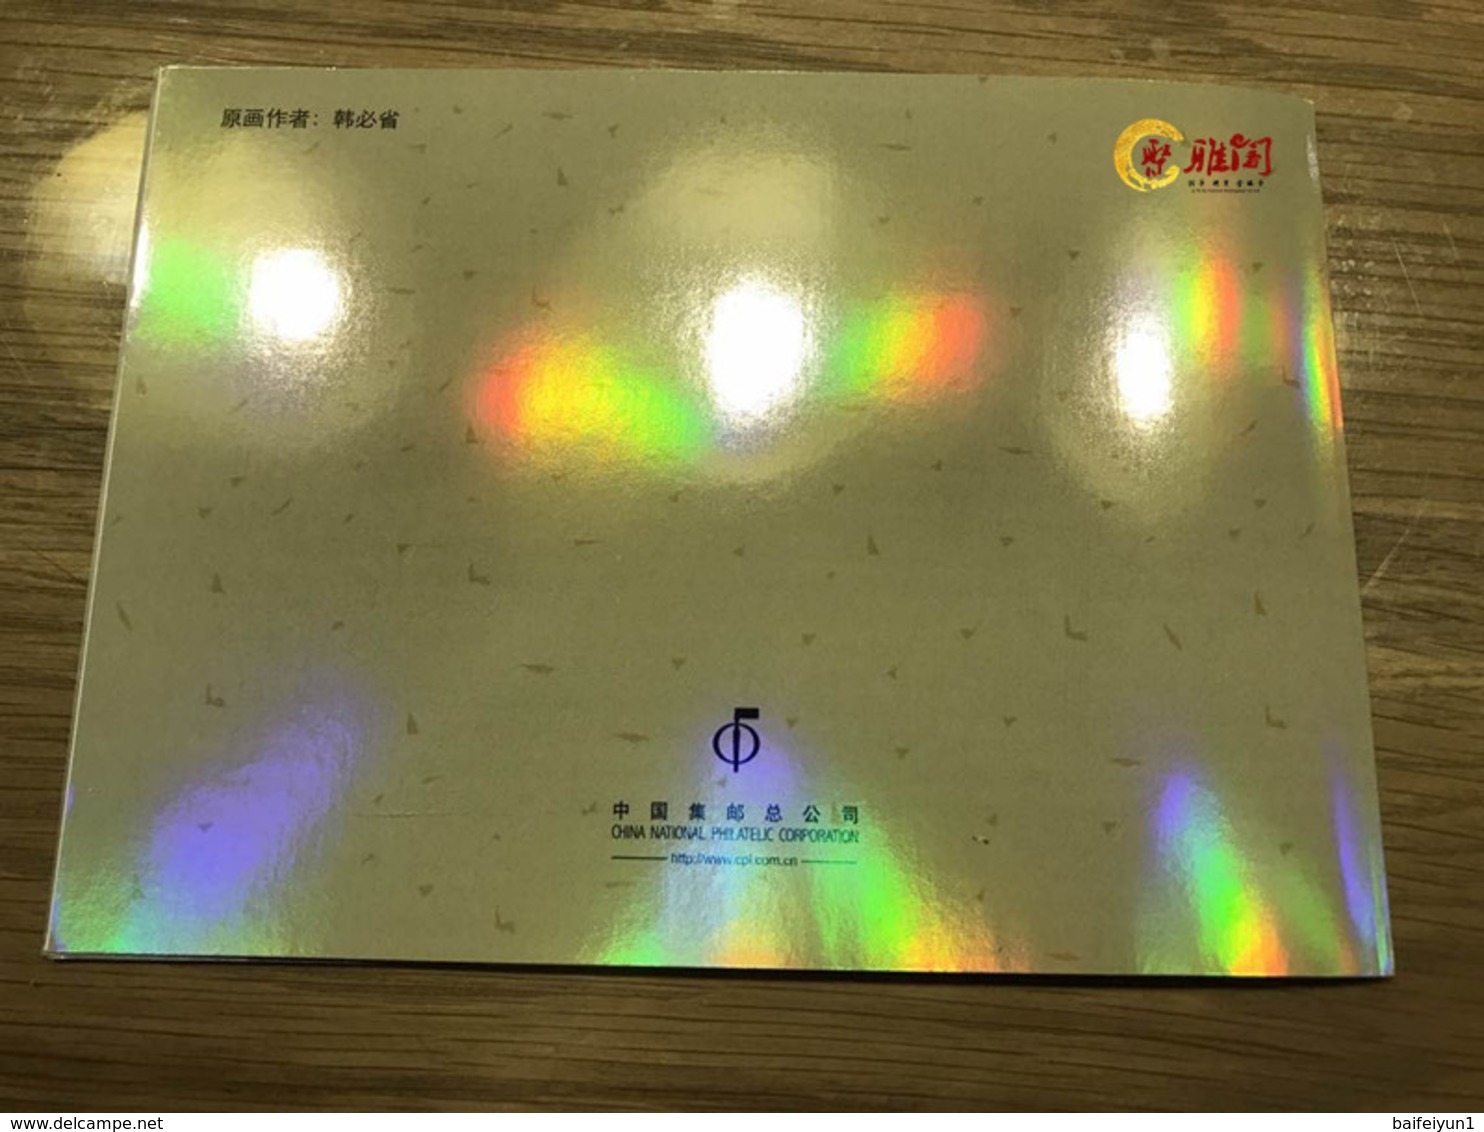 China 2016-1 Intelligent Monkey Celebrating The New Year Special S/S Booklet(Cover Is Holographic) - Holograms